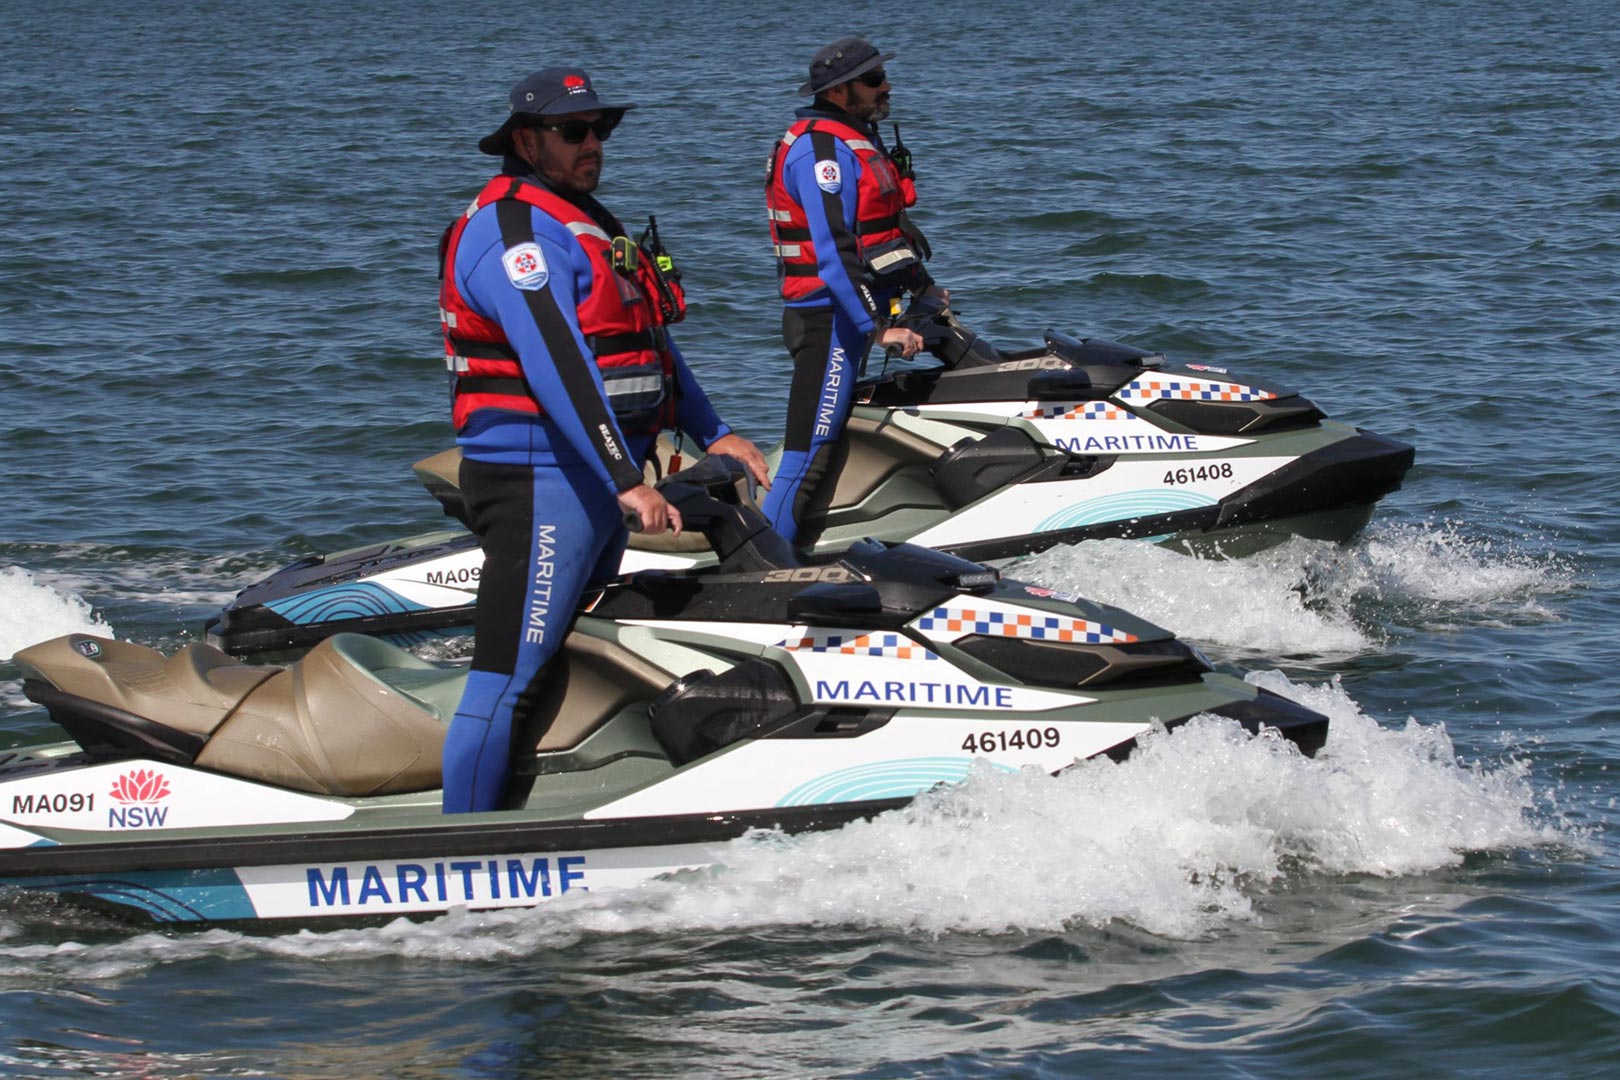 Guide on How to Get a Jet Ski License in Australia